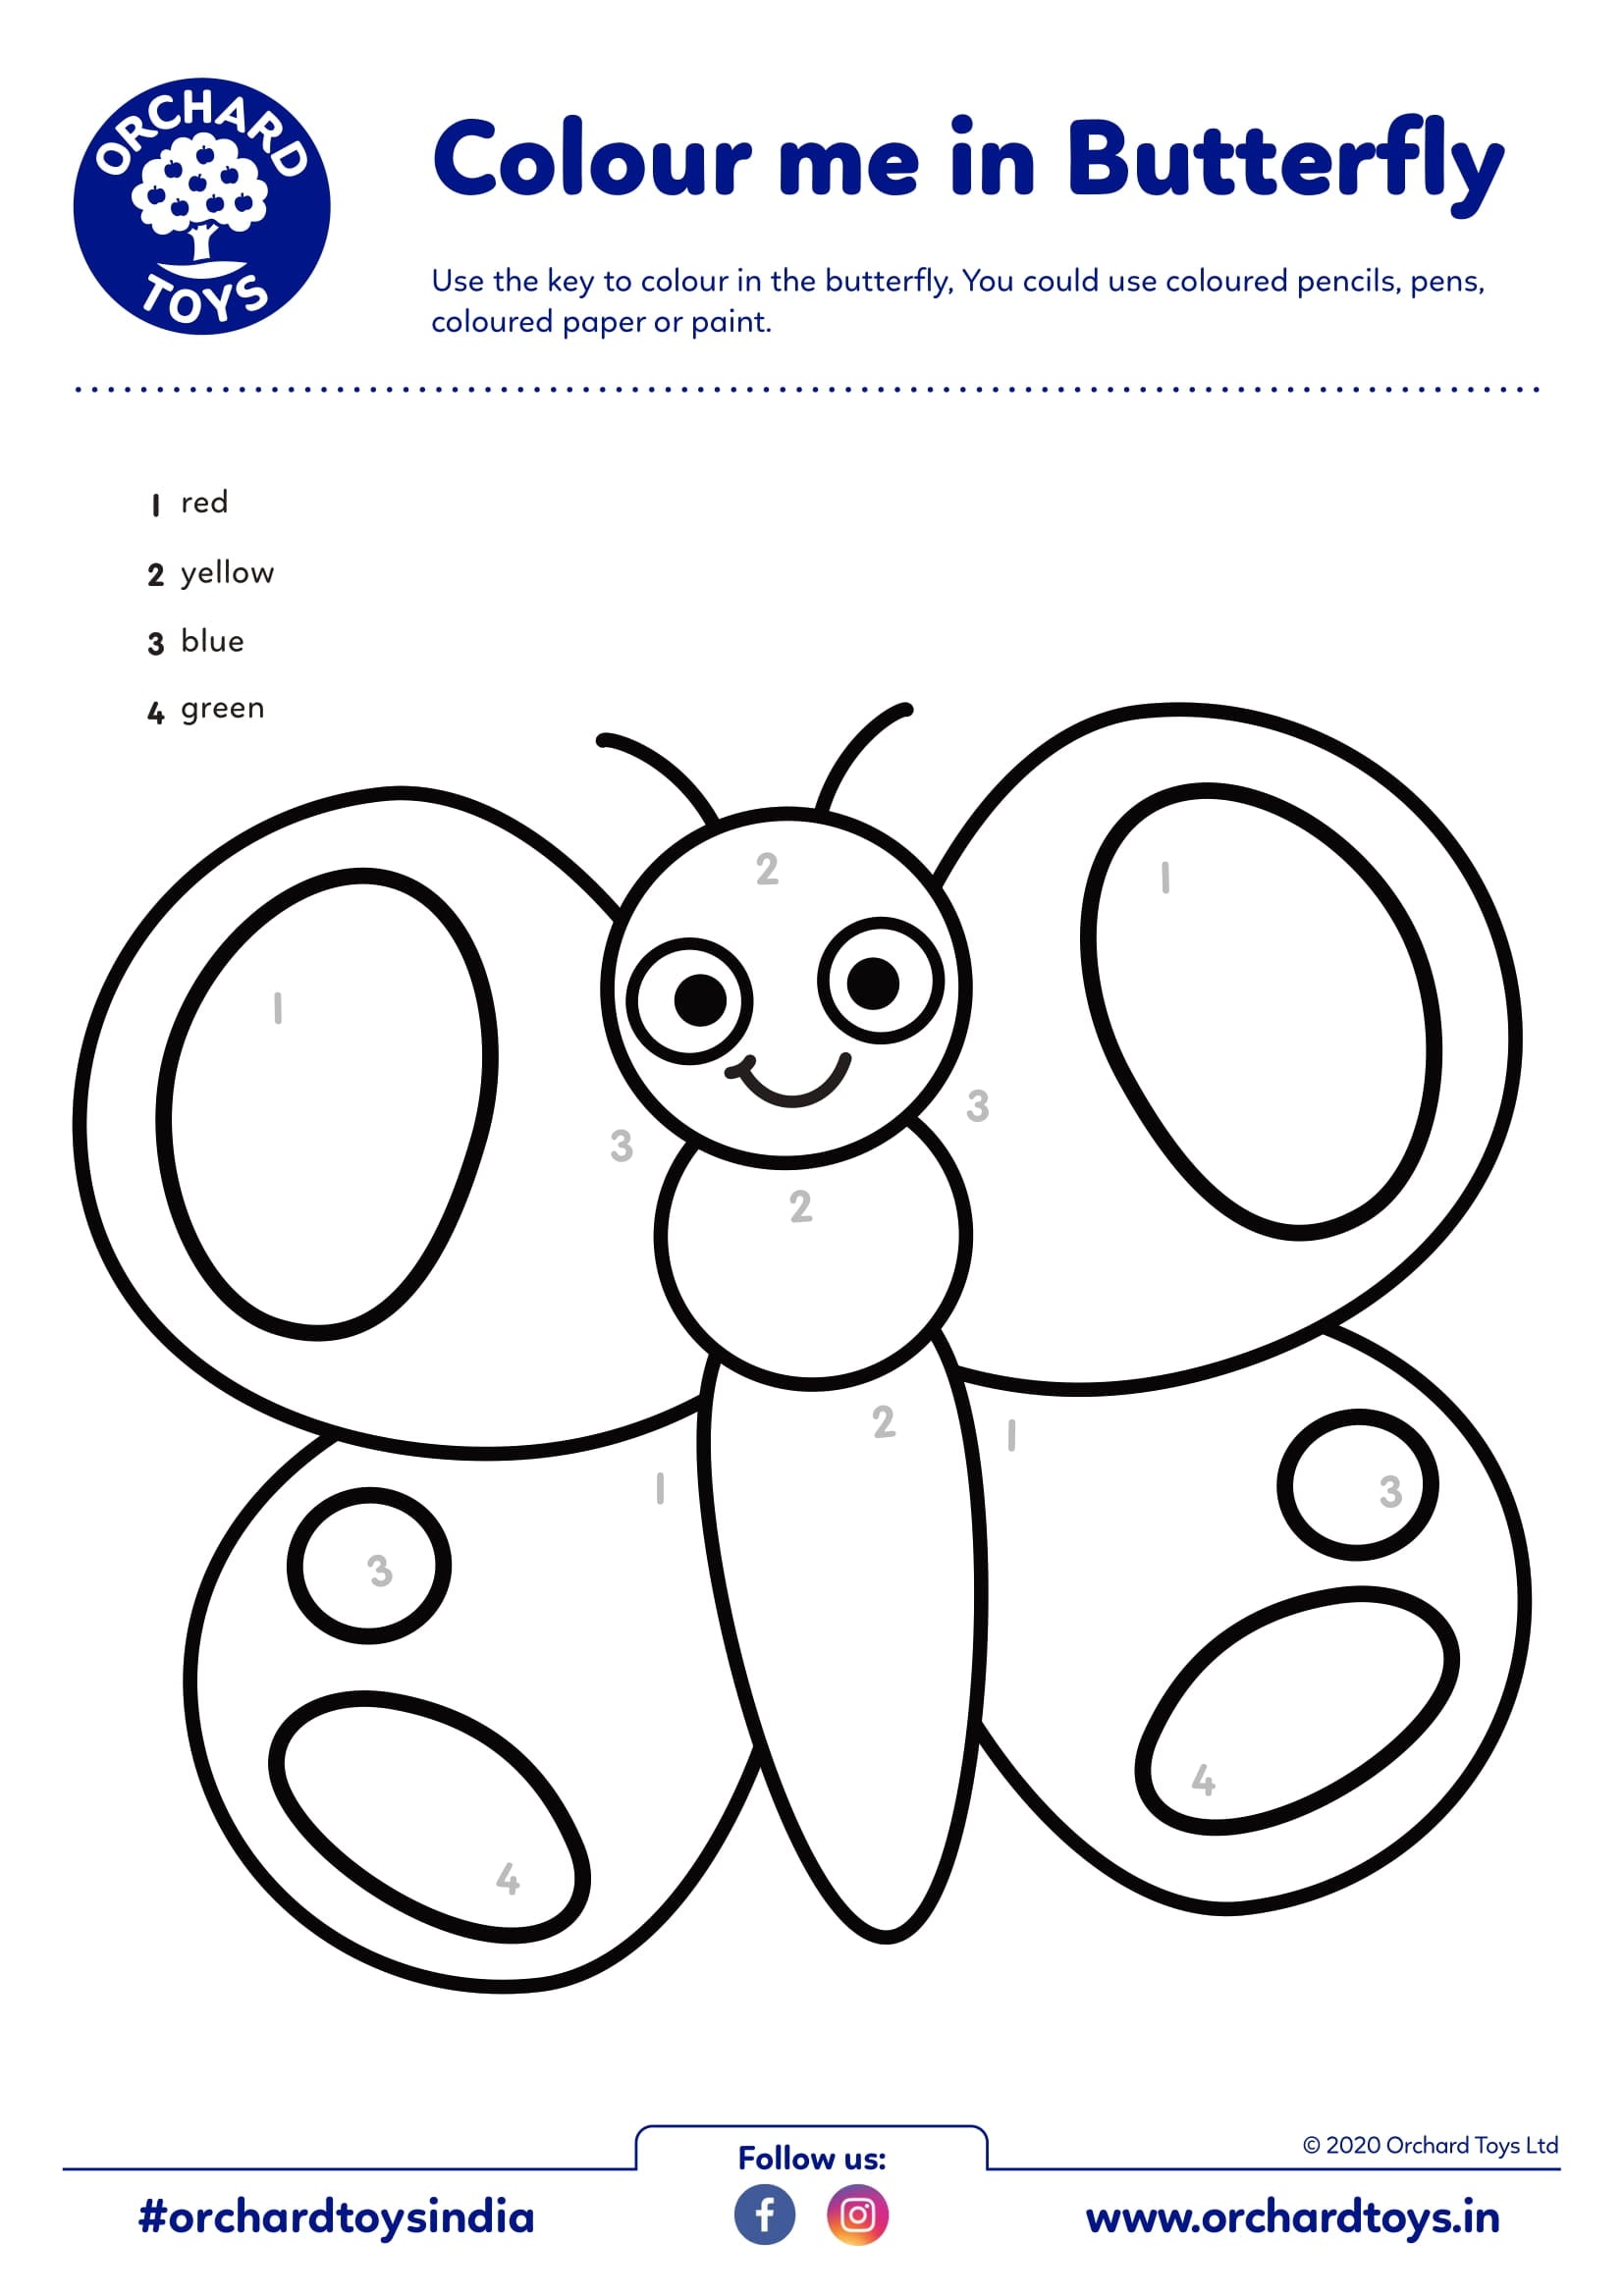 Colour Me in Butterfly Coloring Activity